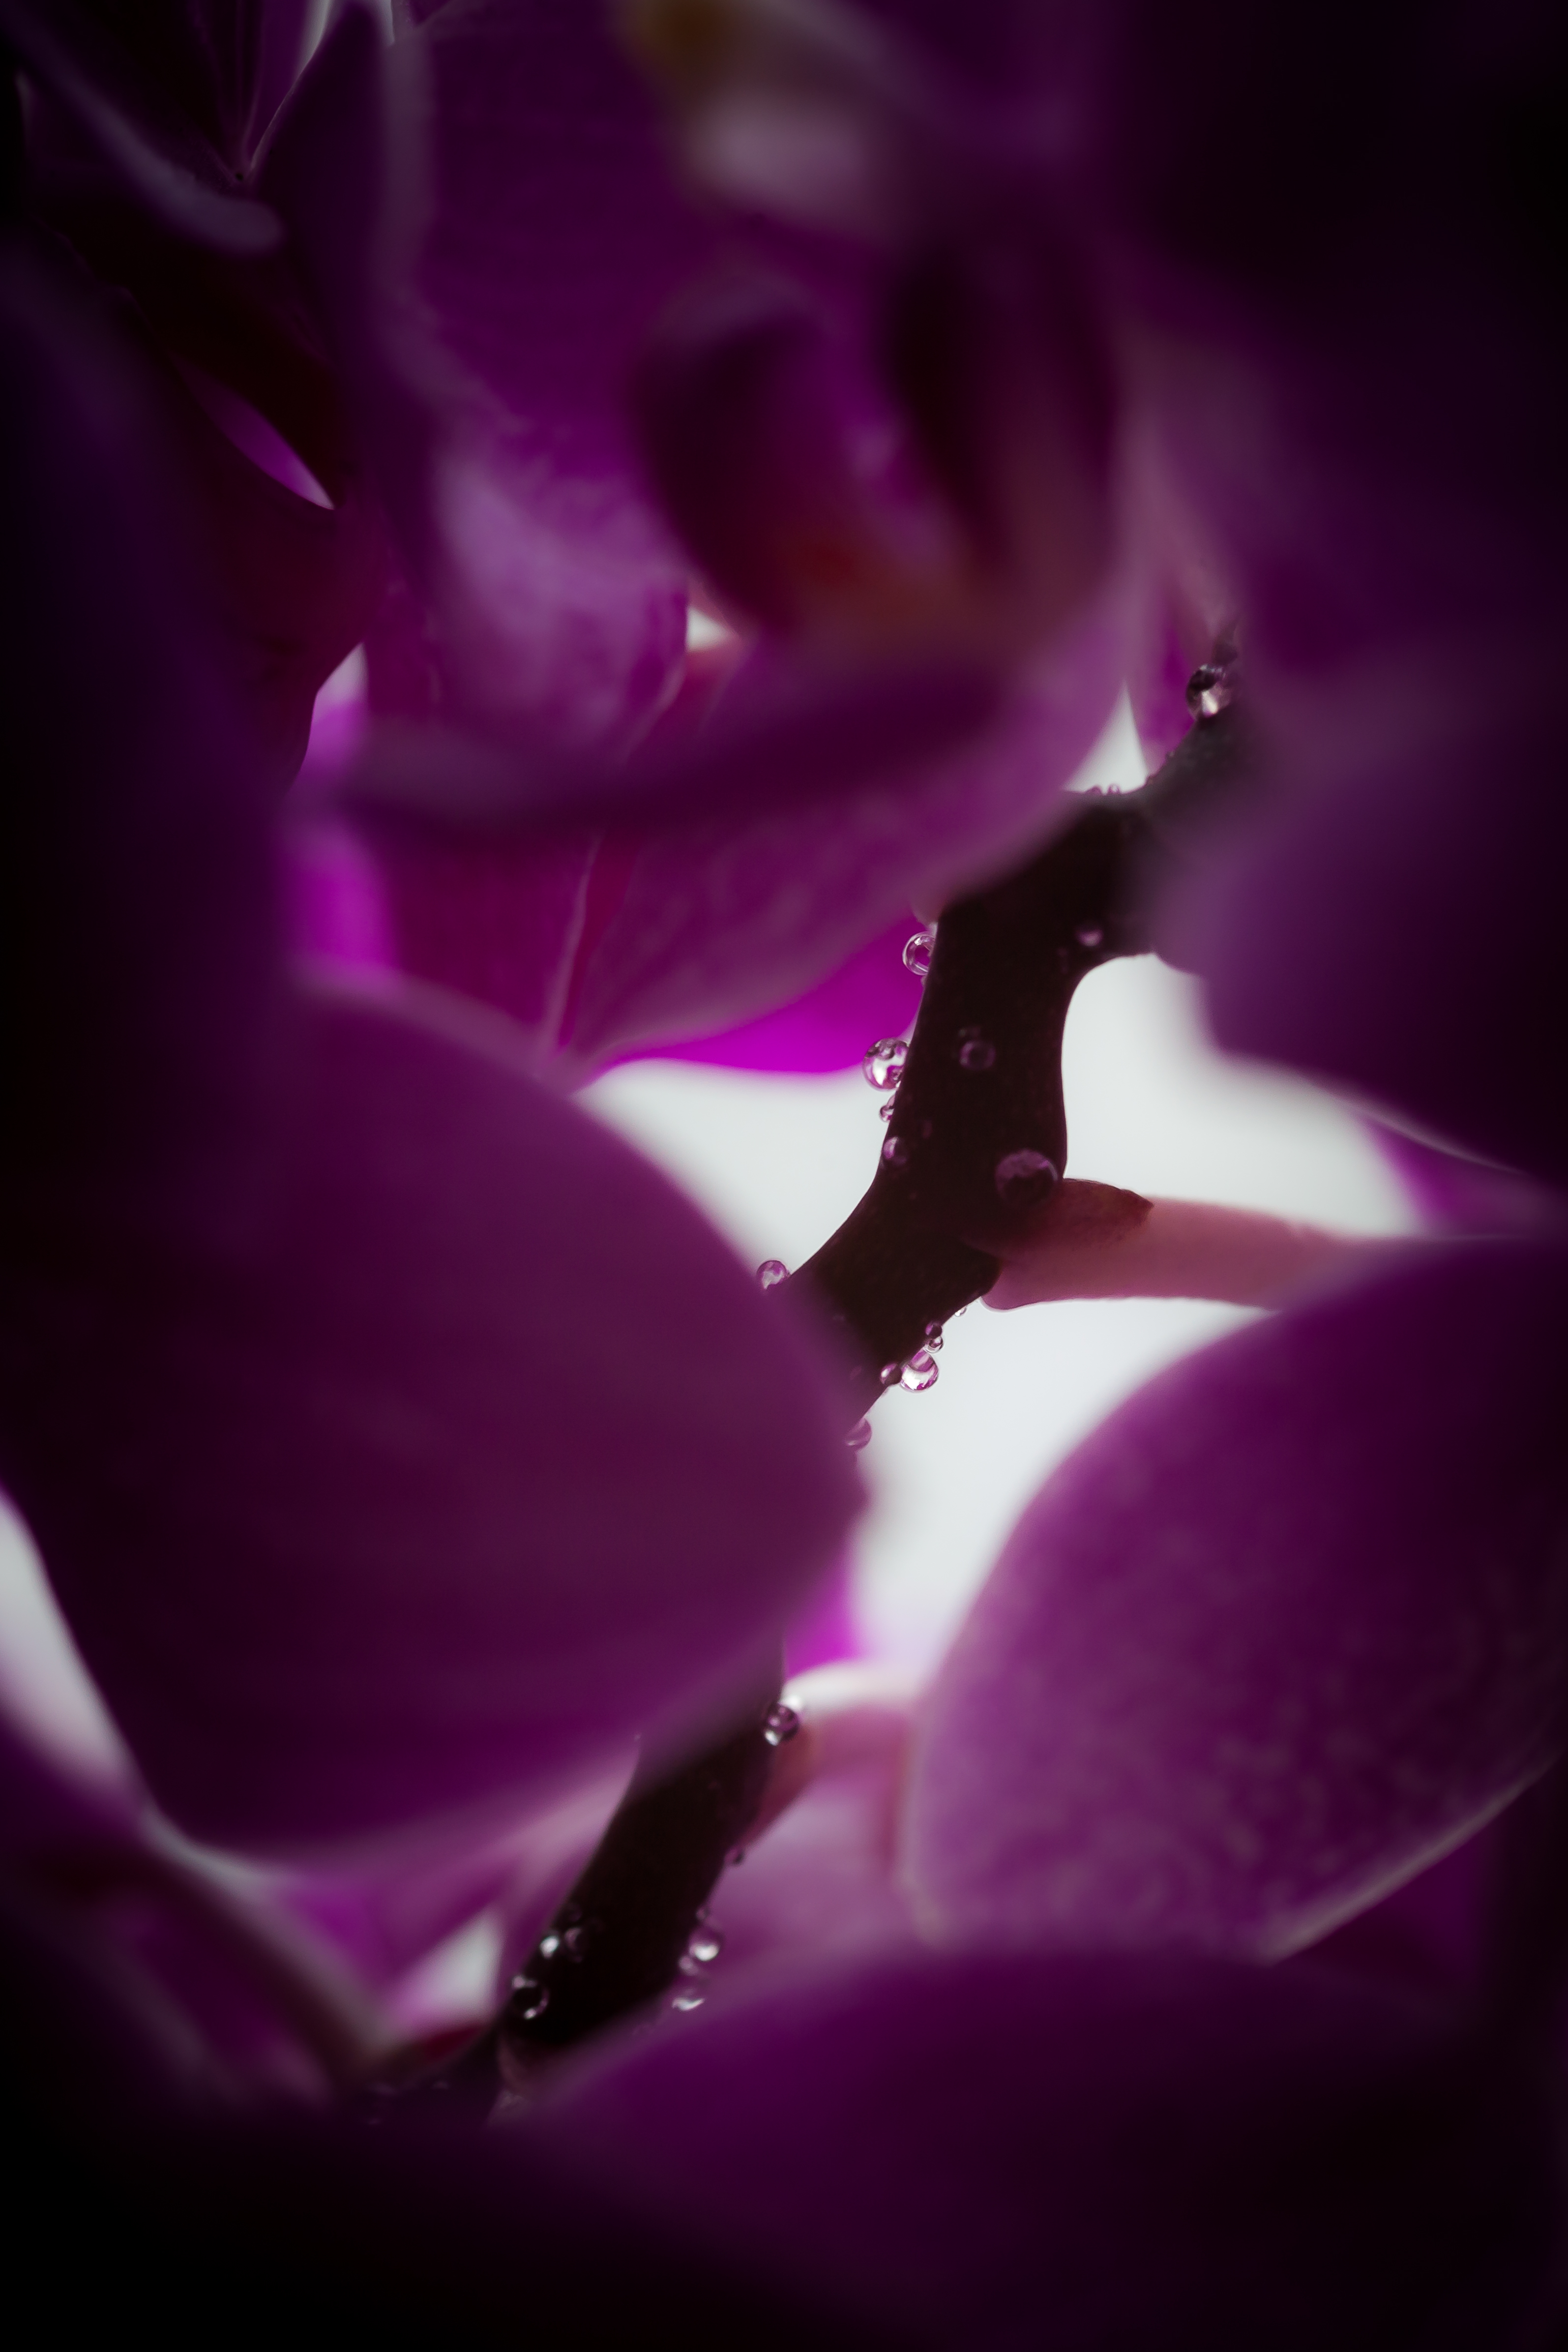 "Tears of an orchid"